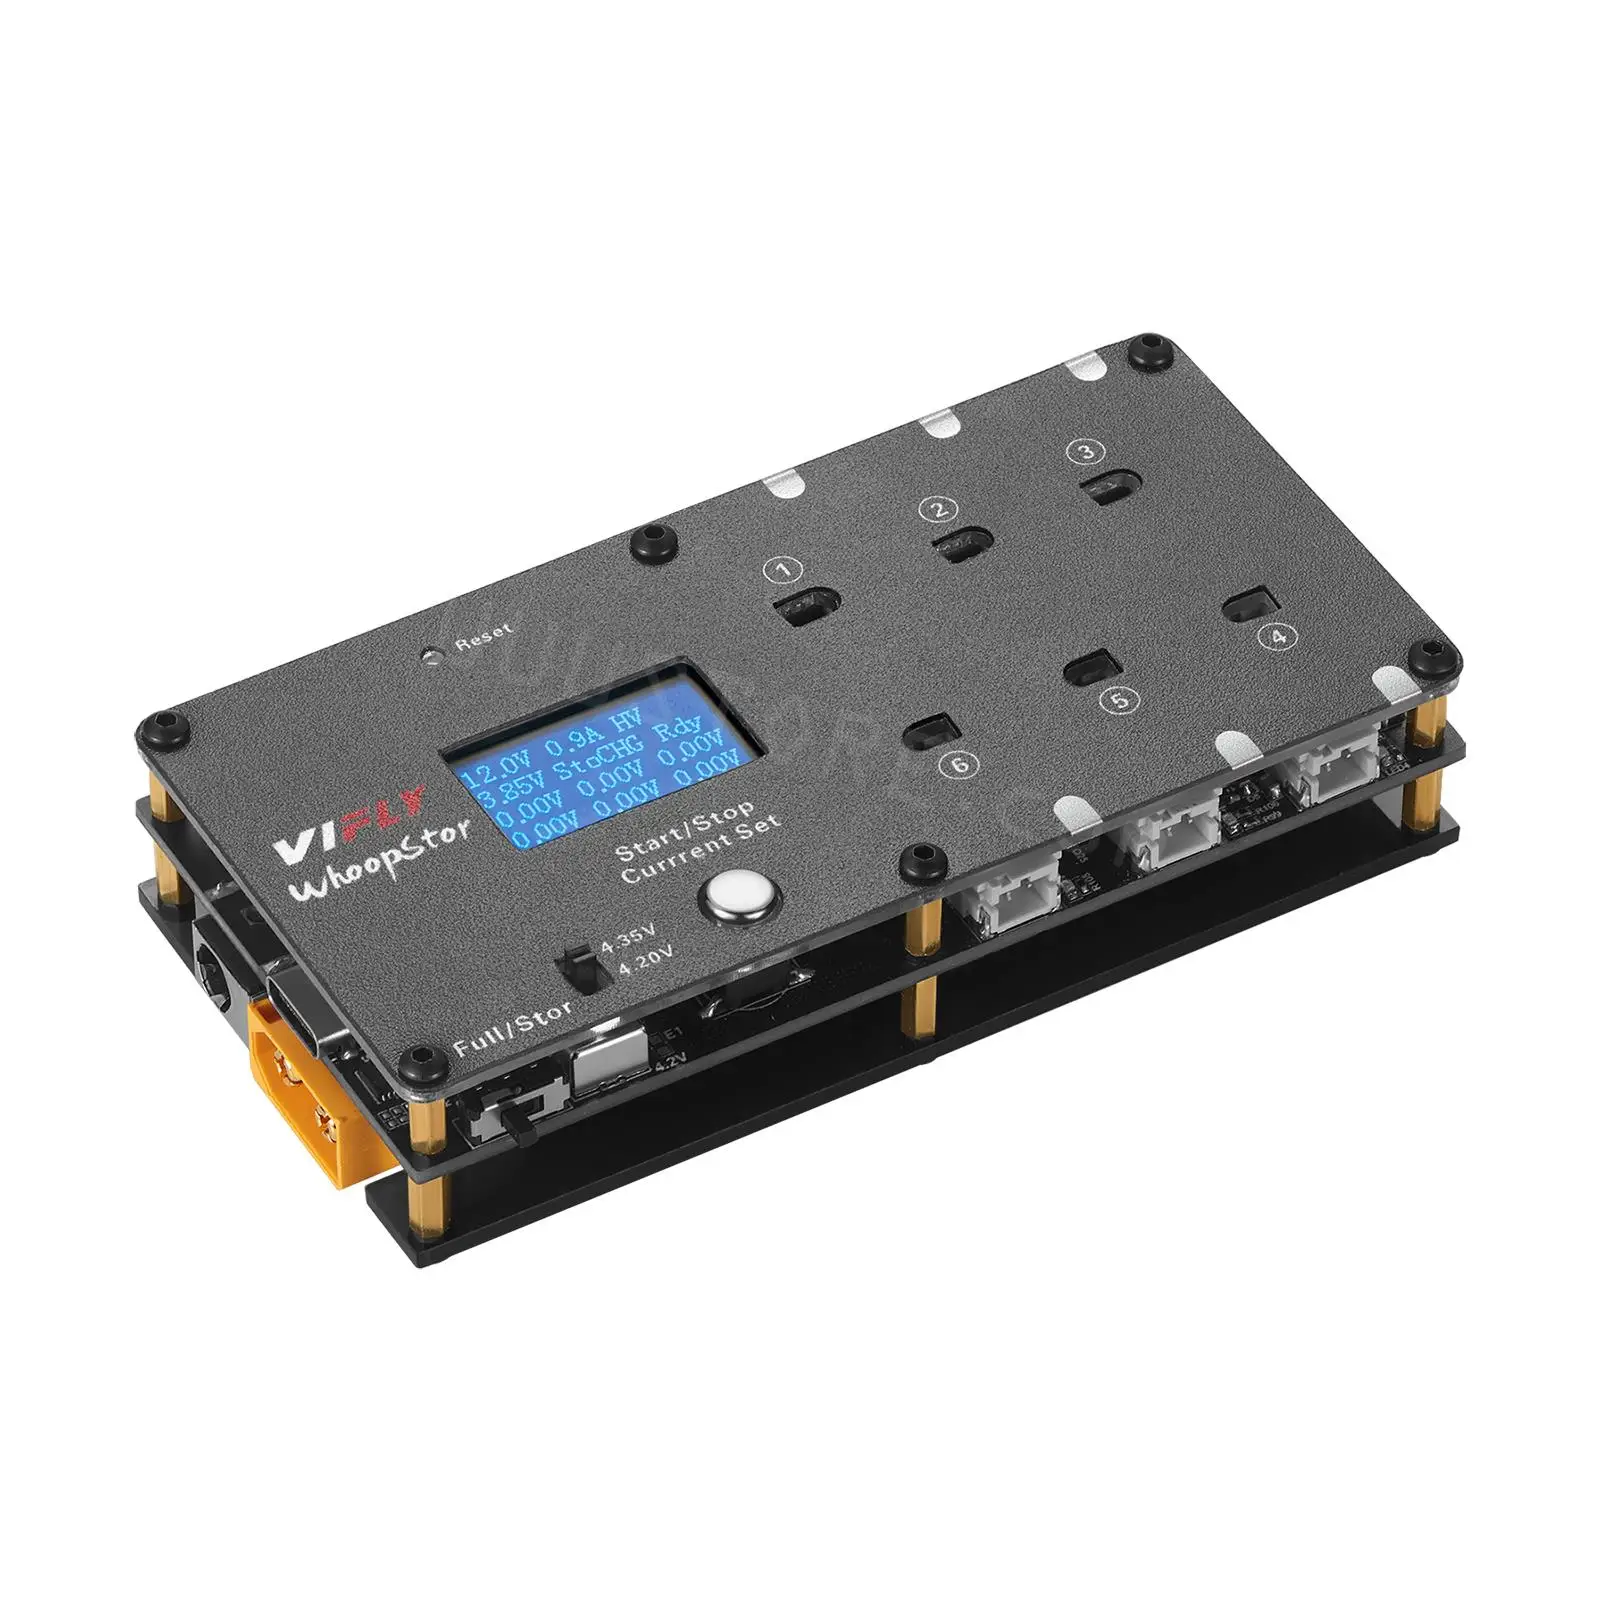 VIFLY WhoopStor V1 6 Ports 1S Battery Storage Charger Discharger